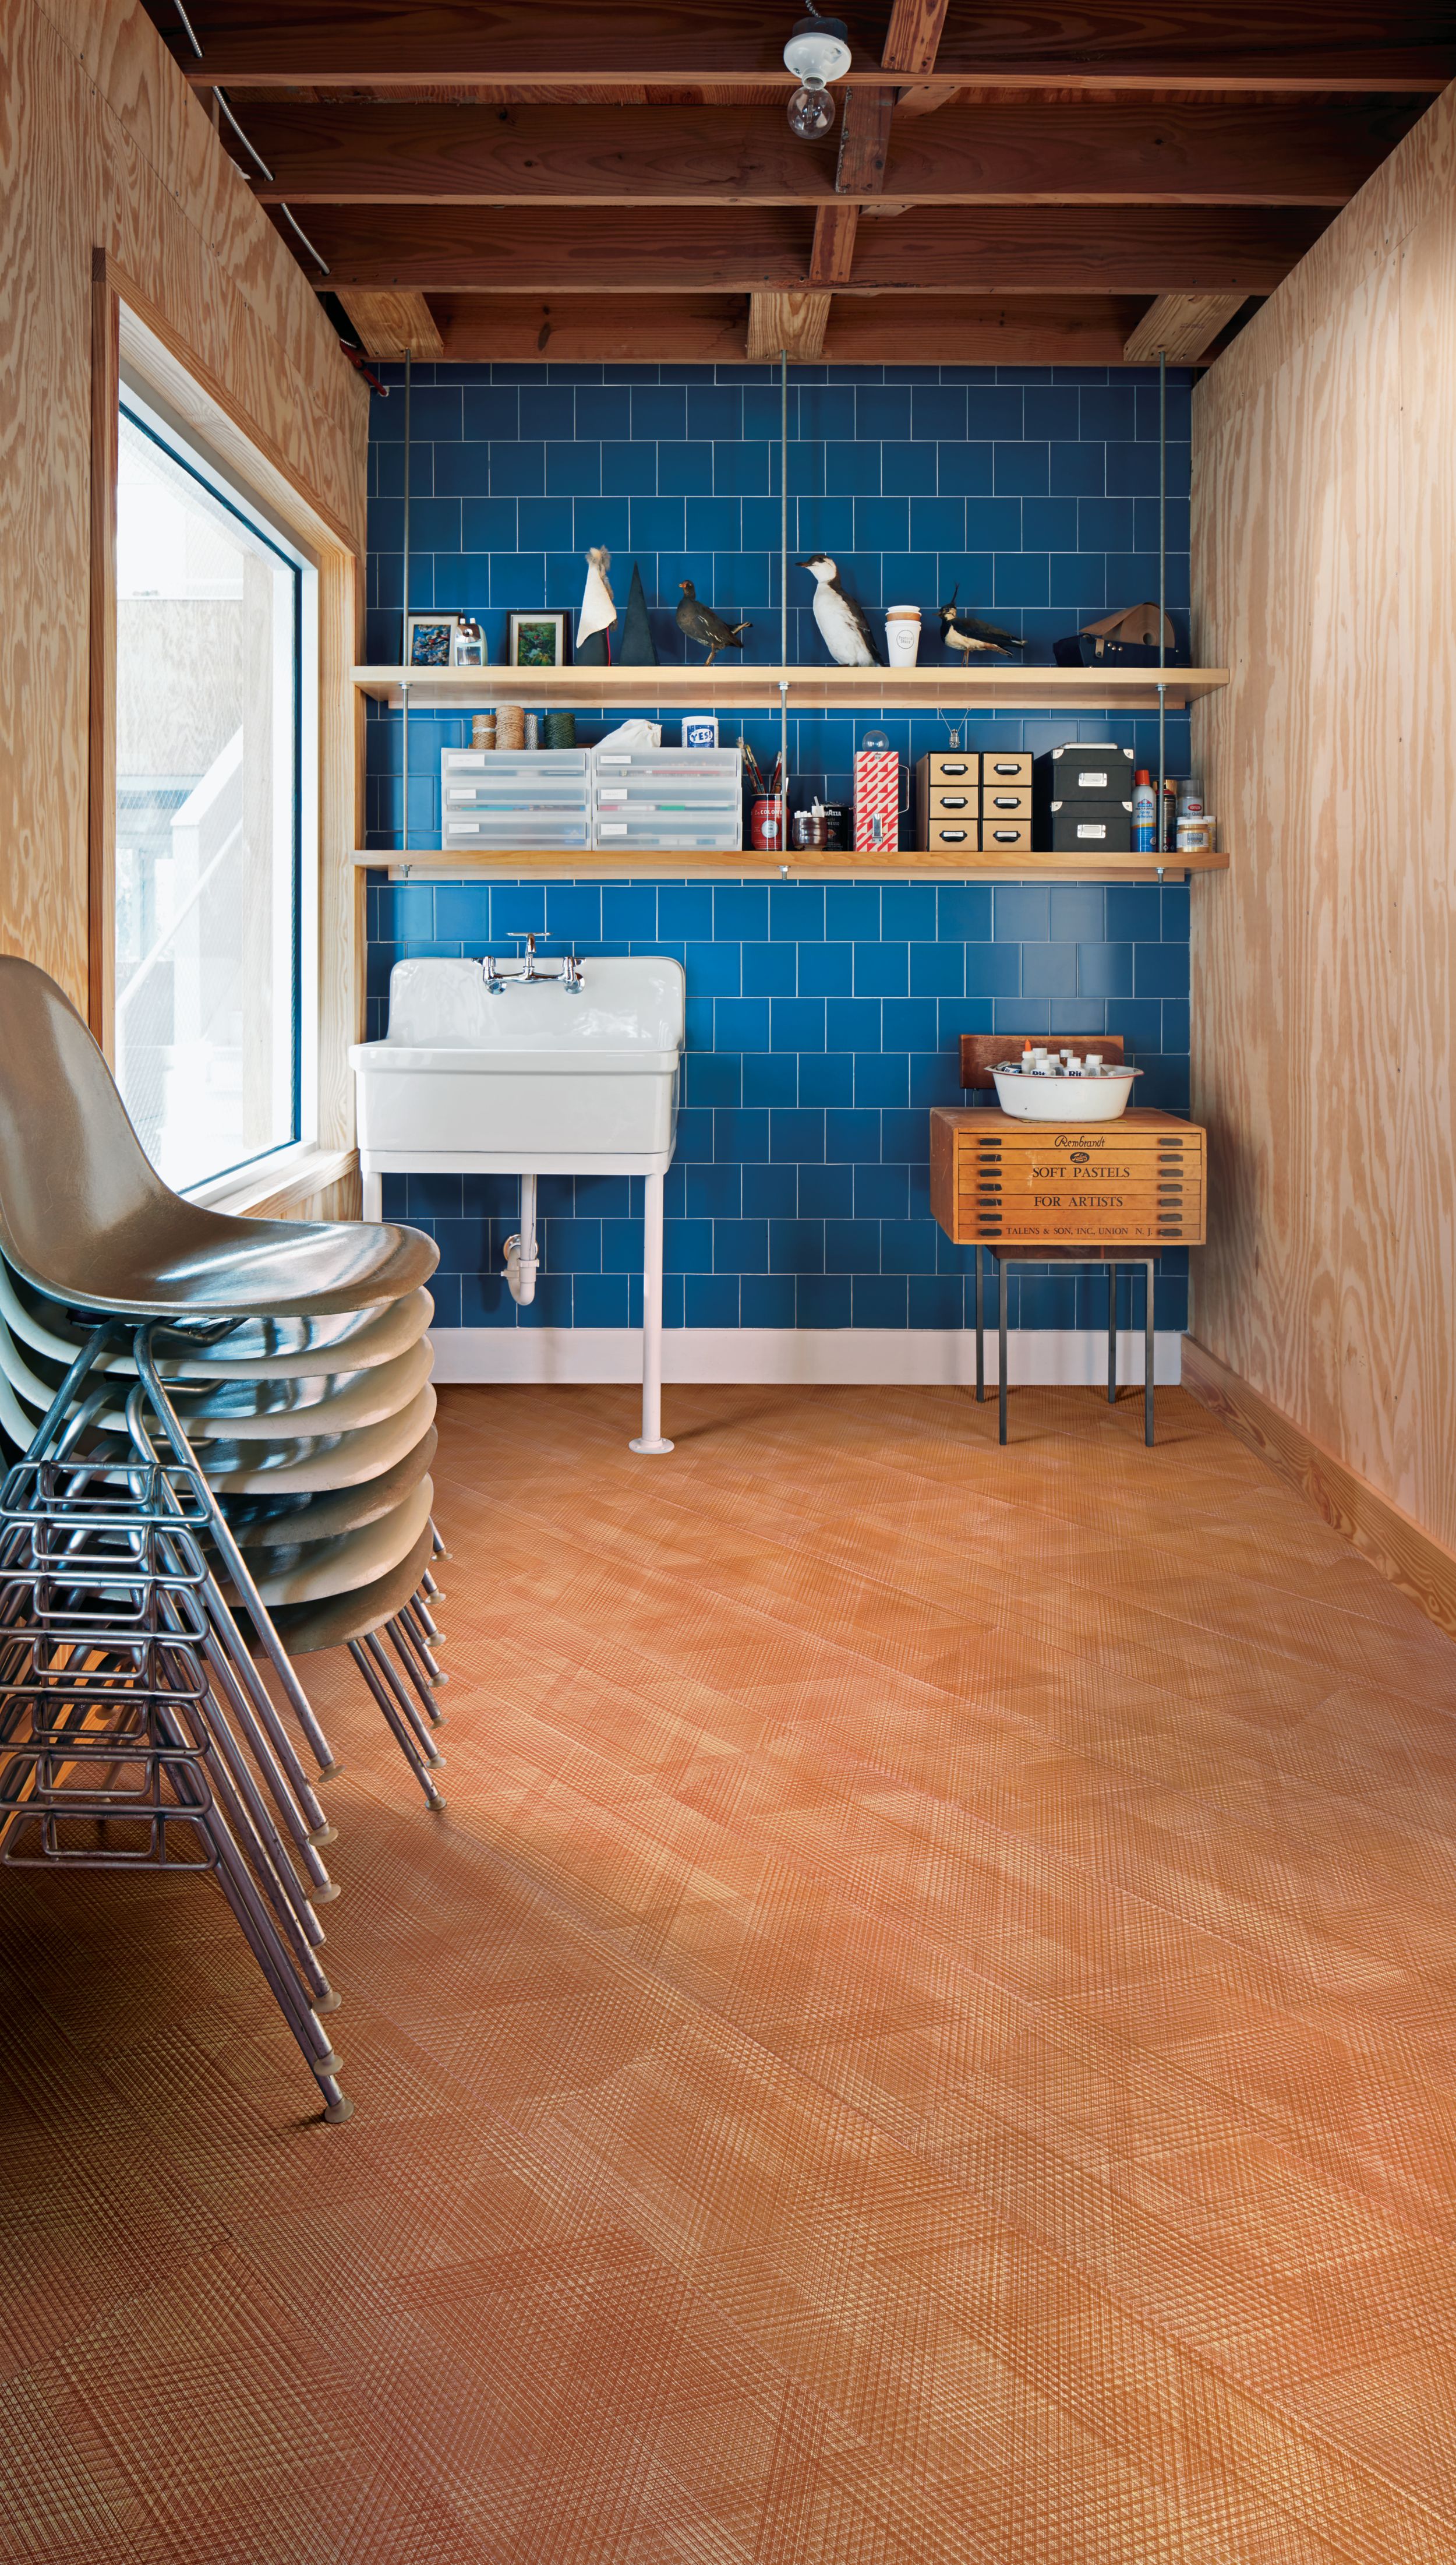 Interface Drawn Lines LVT in storage area with shelving and sink número de imagen 4